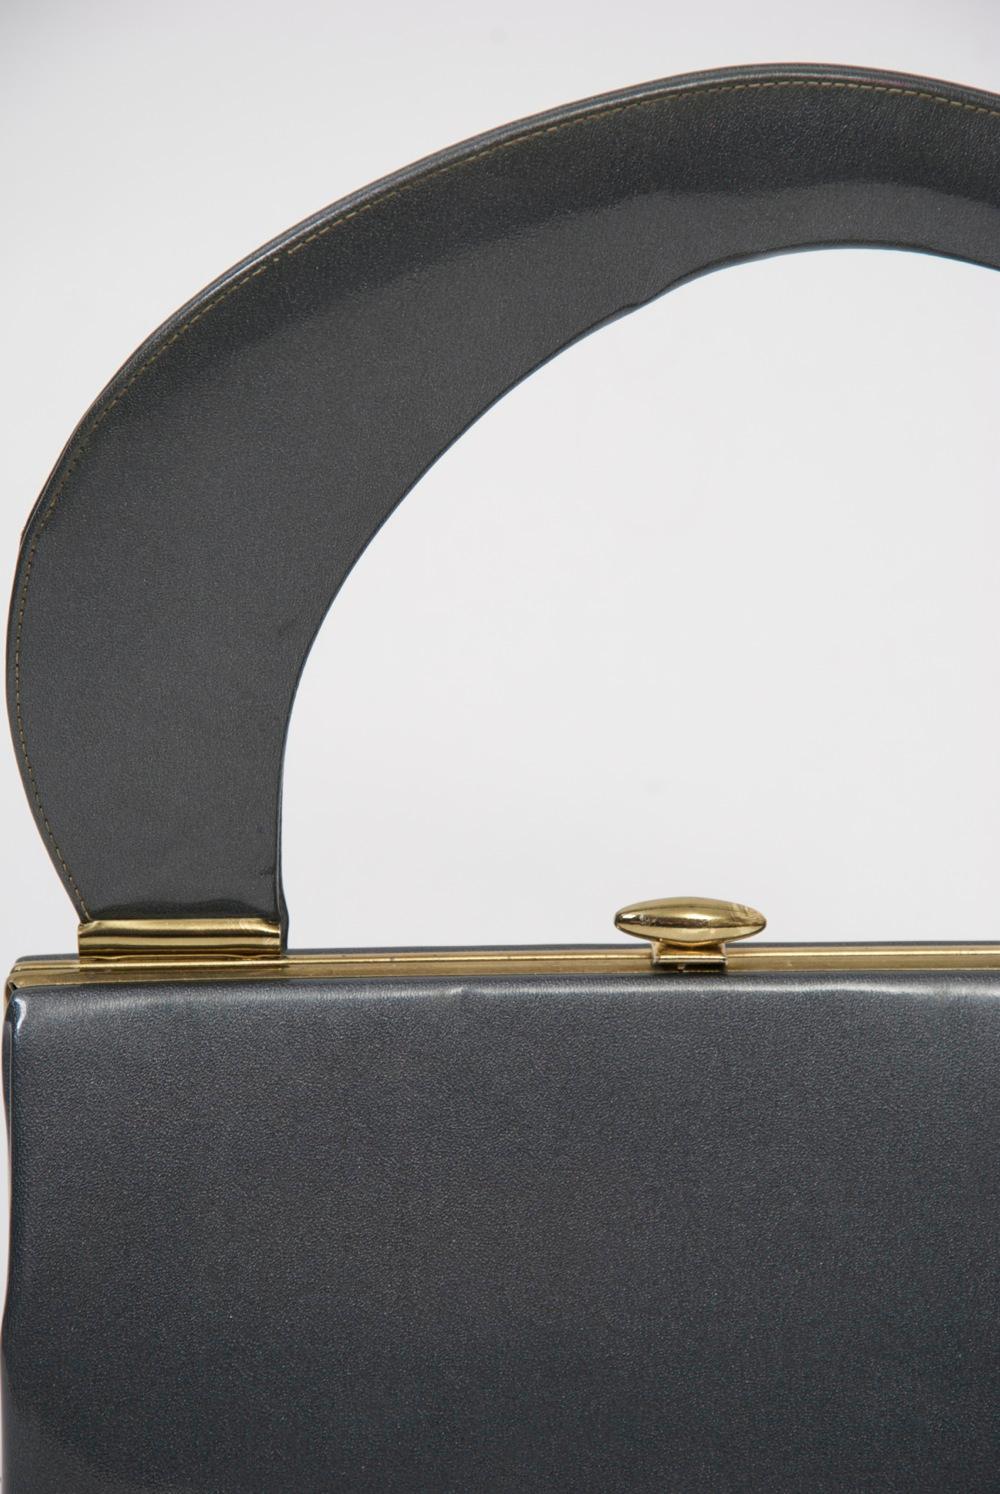 1960s large handbag featuring an unusual sweep of a handle, lending it a modernist aesthetic, and crafted in a most desirable color and material - gunmetal patent. Simple brass frame and closure keeps it streamlined. The interior is of beige fabric